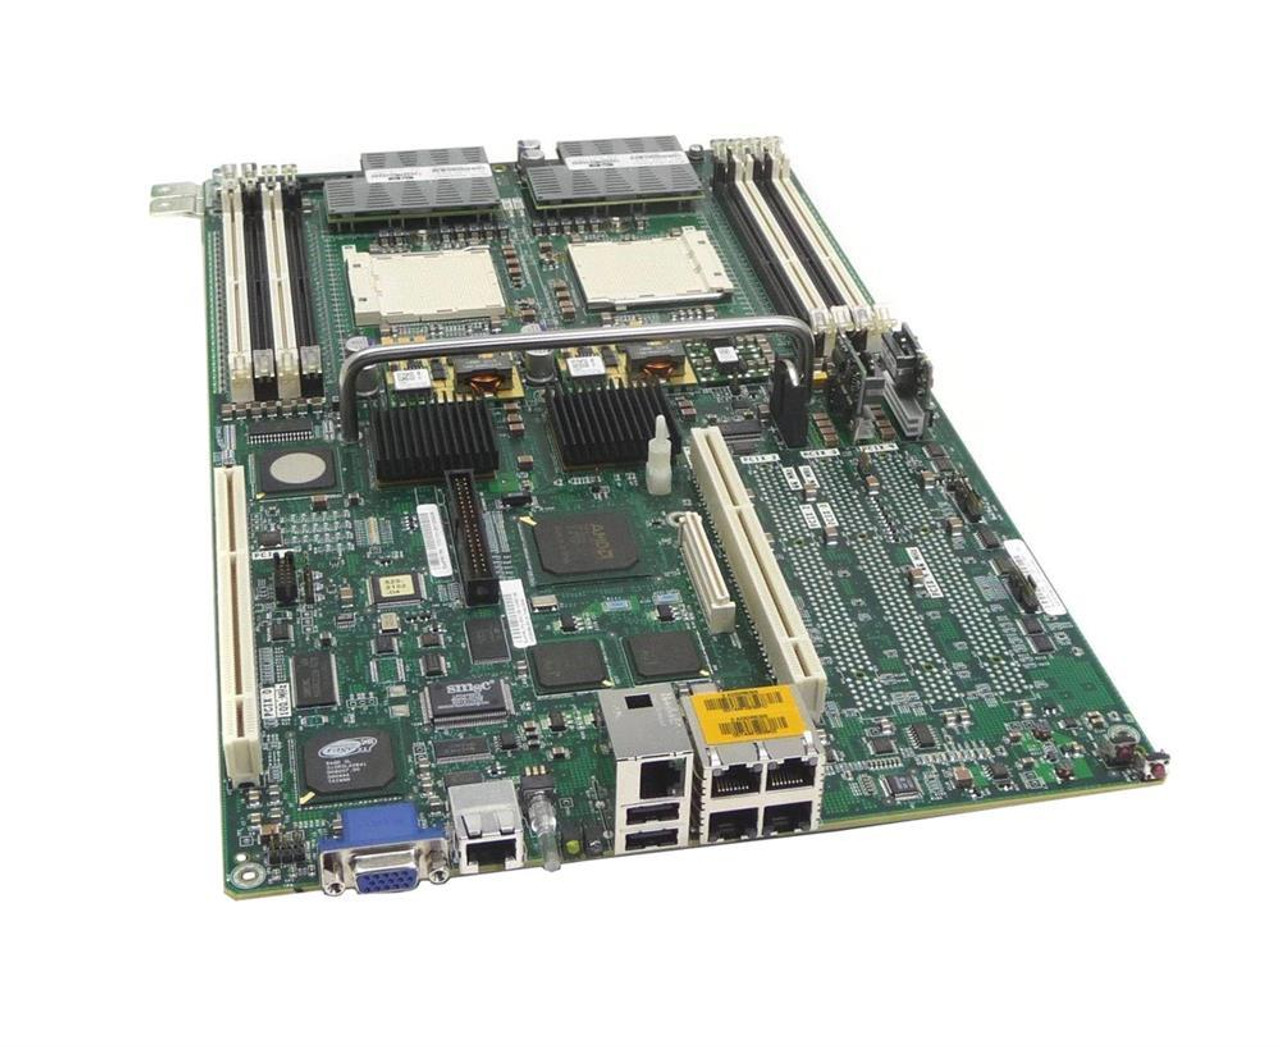 5007513 Sun System Board (Motherboard) for X4100 (Refurbished)